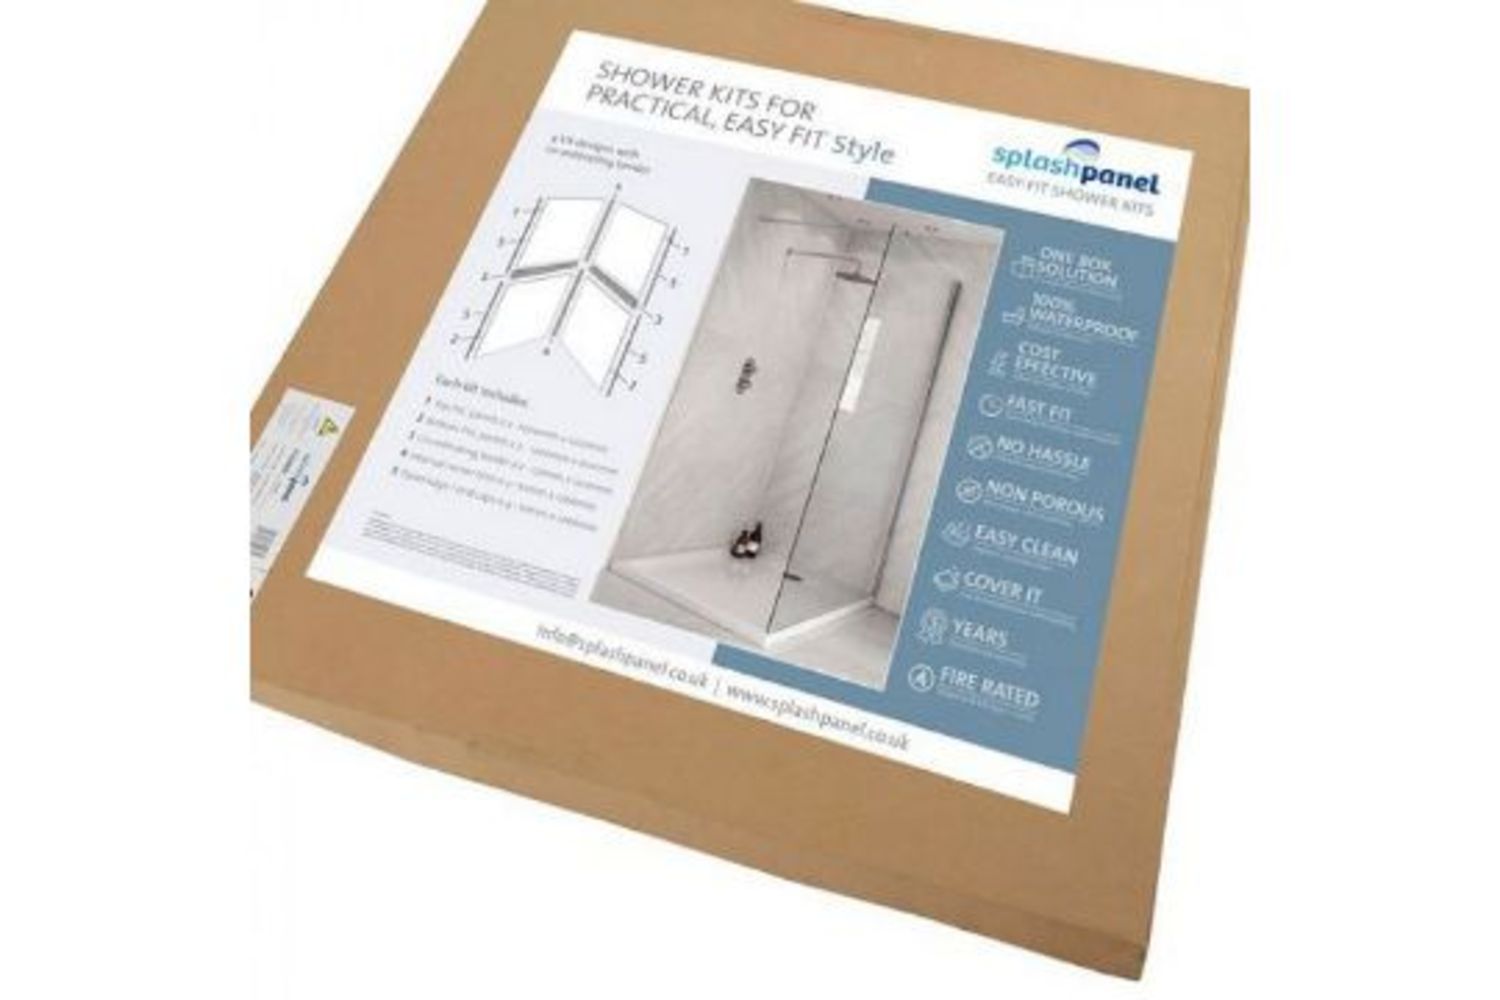 Pallets of Brand new Splash Panel shower kits, for a limited time only starting prices at 5% of retail!!!